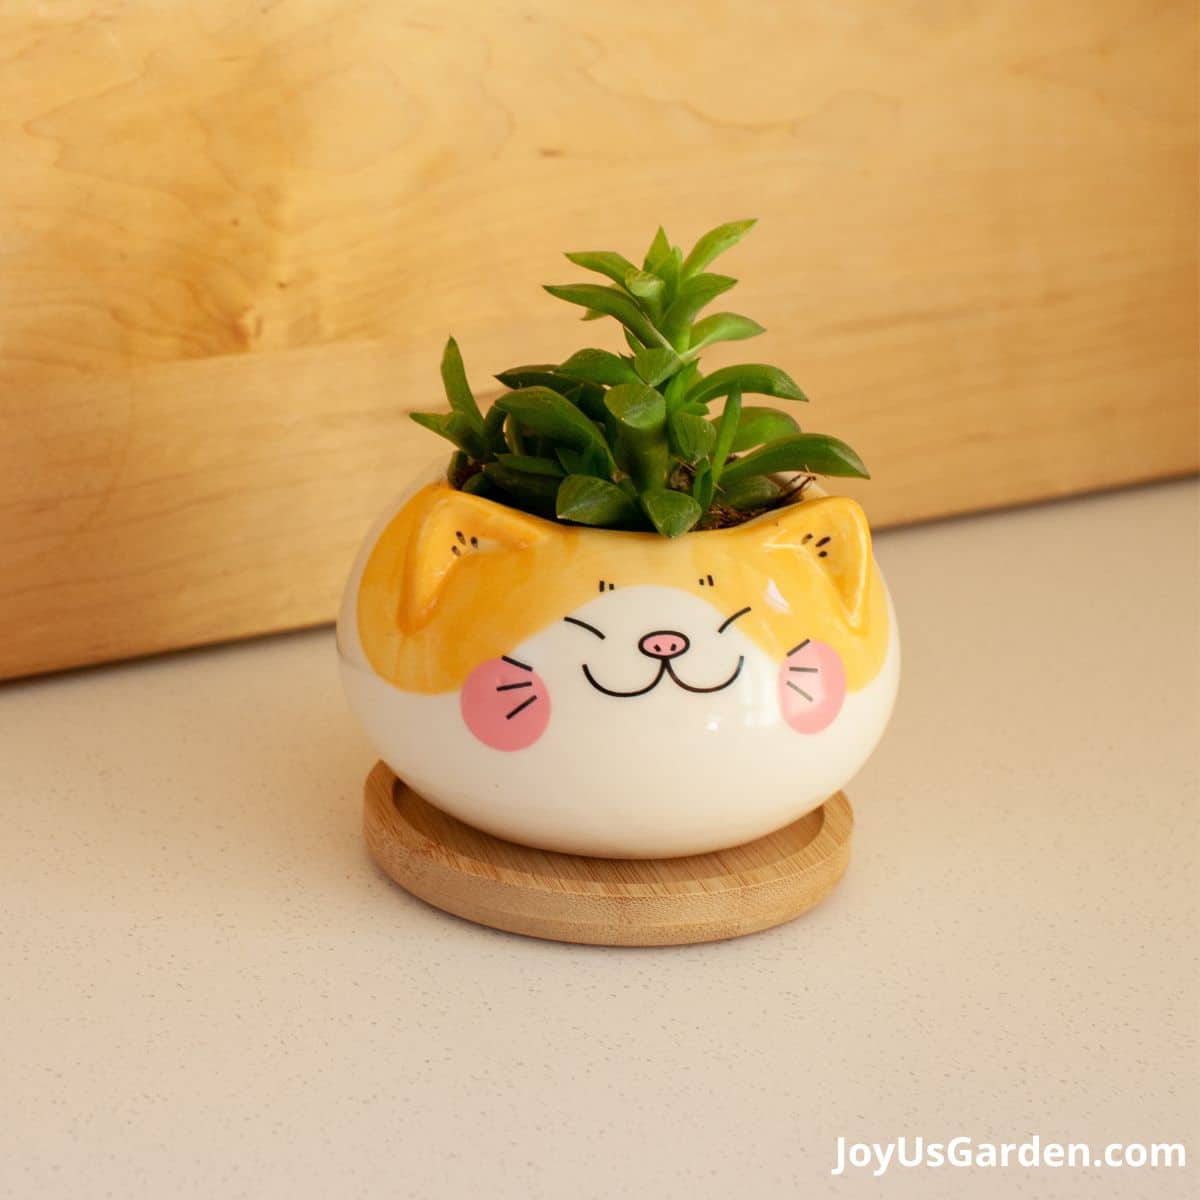 cat face animal Planter with succulent planted inside from amazon